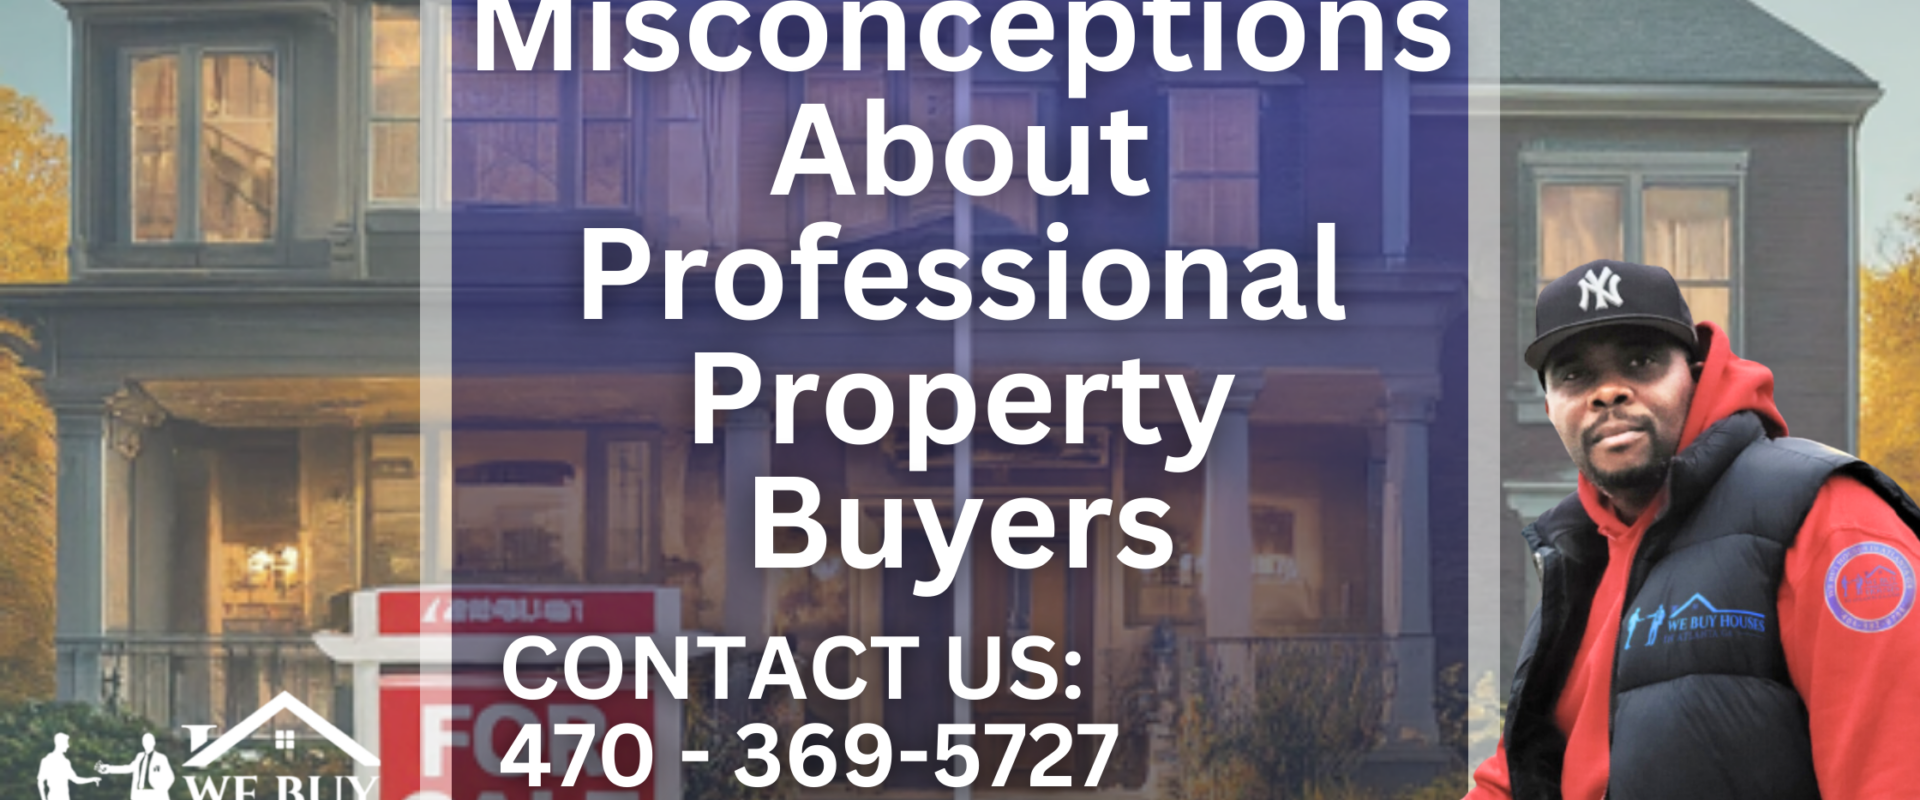 5 Common Misconceptions About Professional Property Buyers